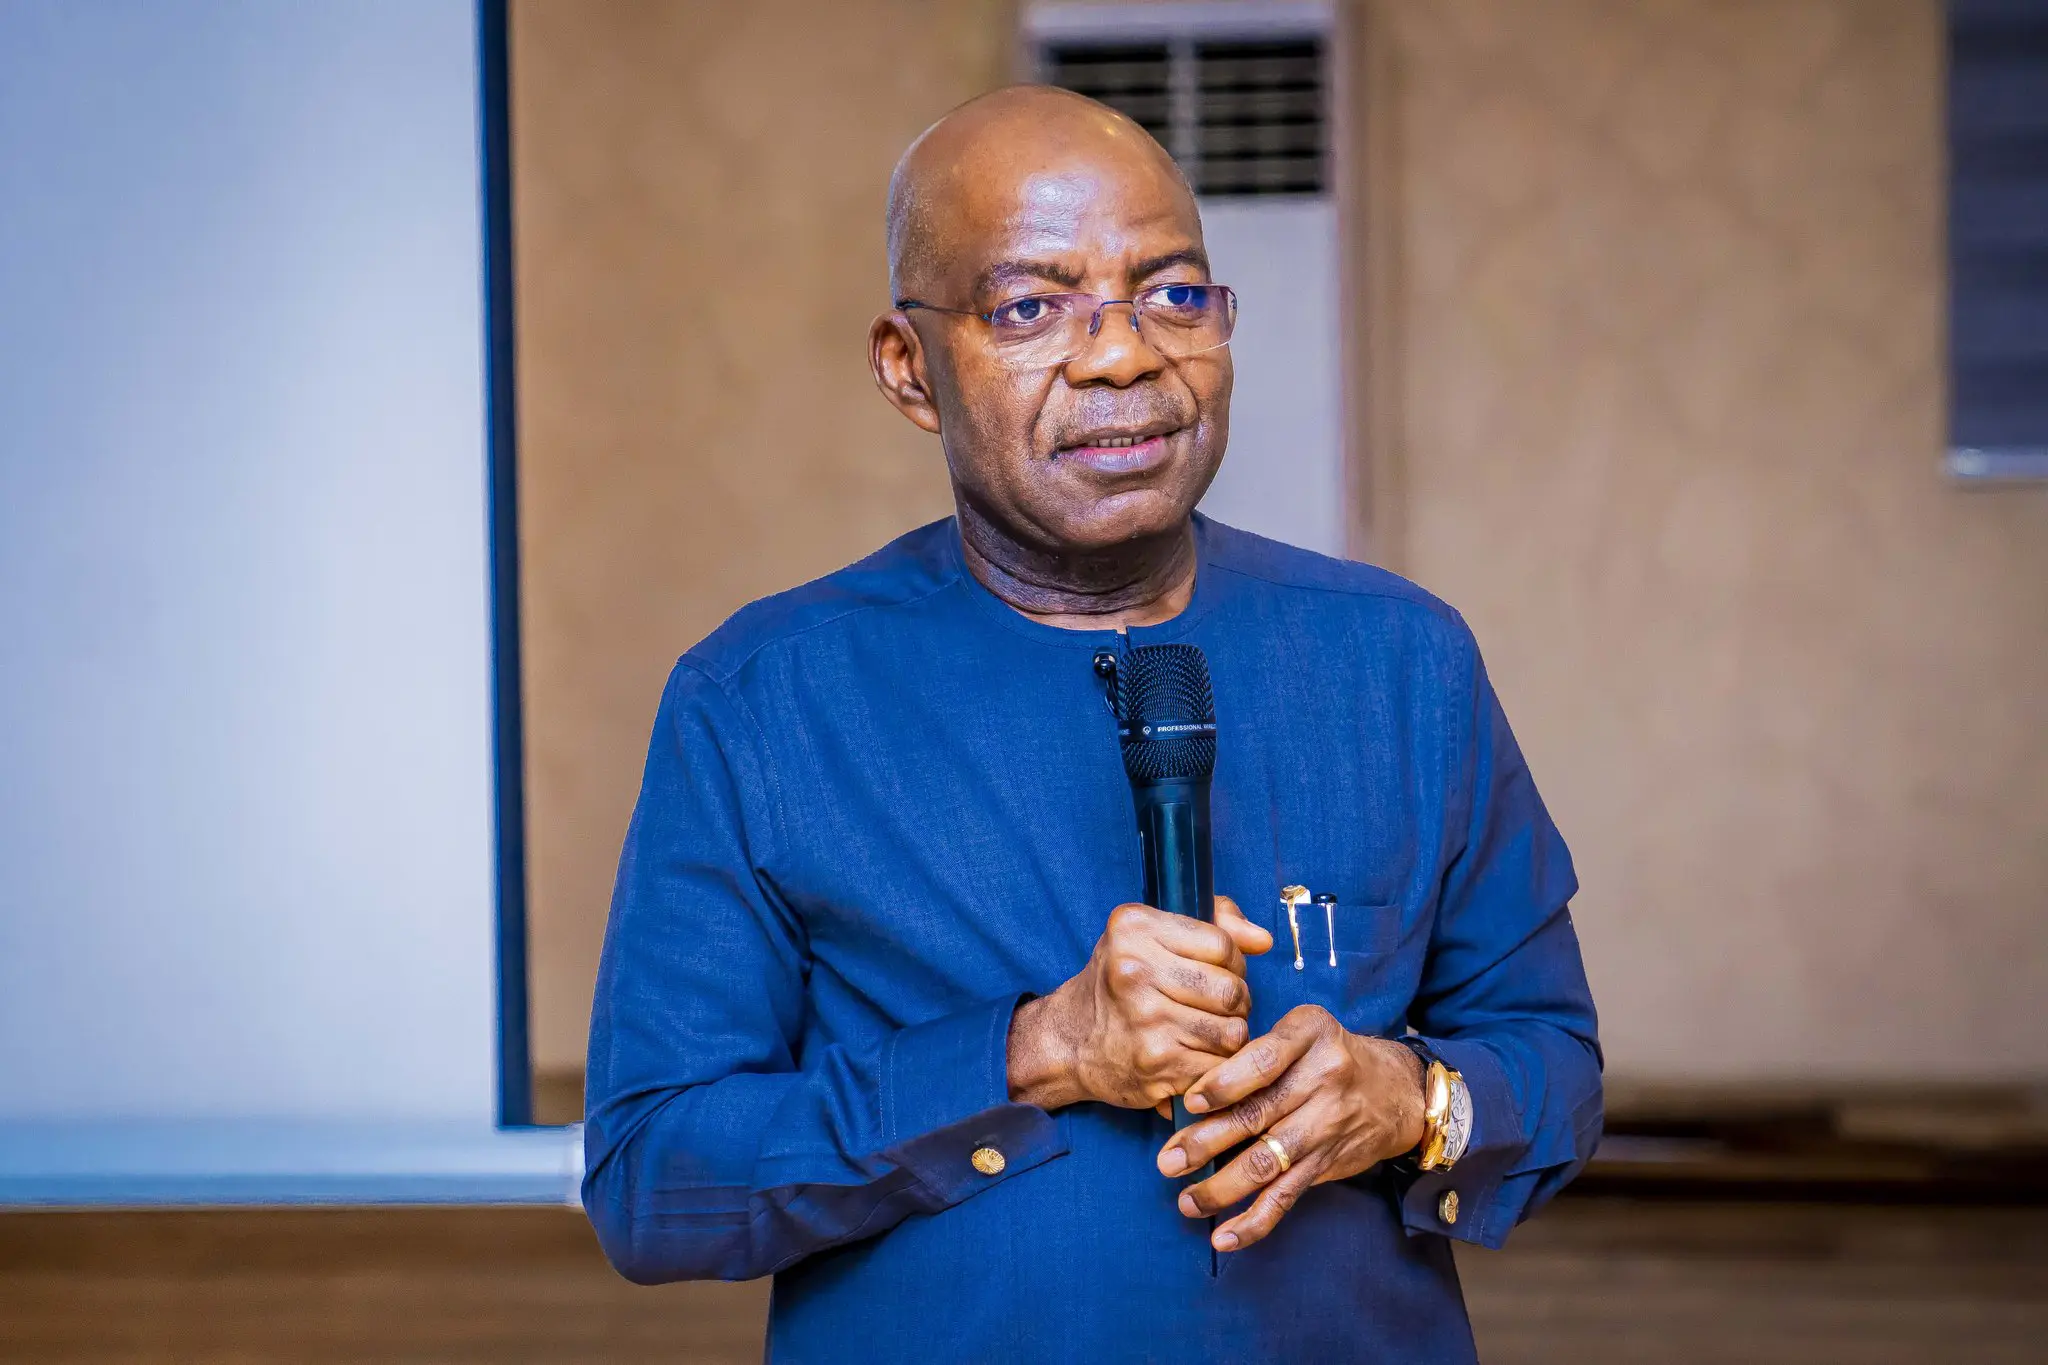 Foreign investors to pick talents from Abia grassroots sports - Gov Otti